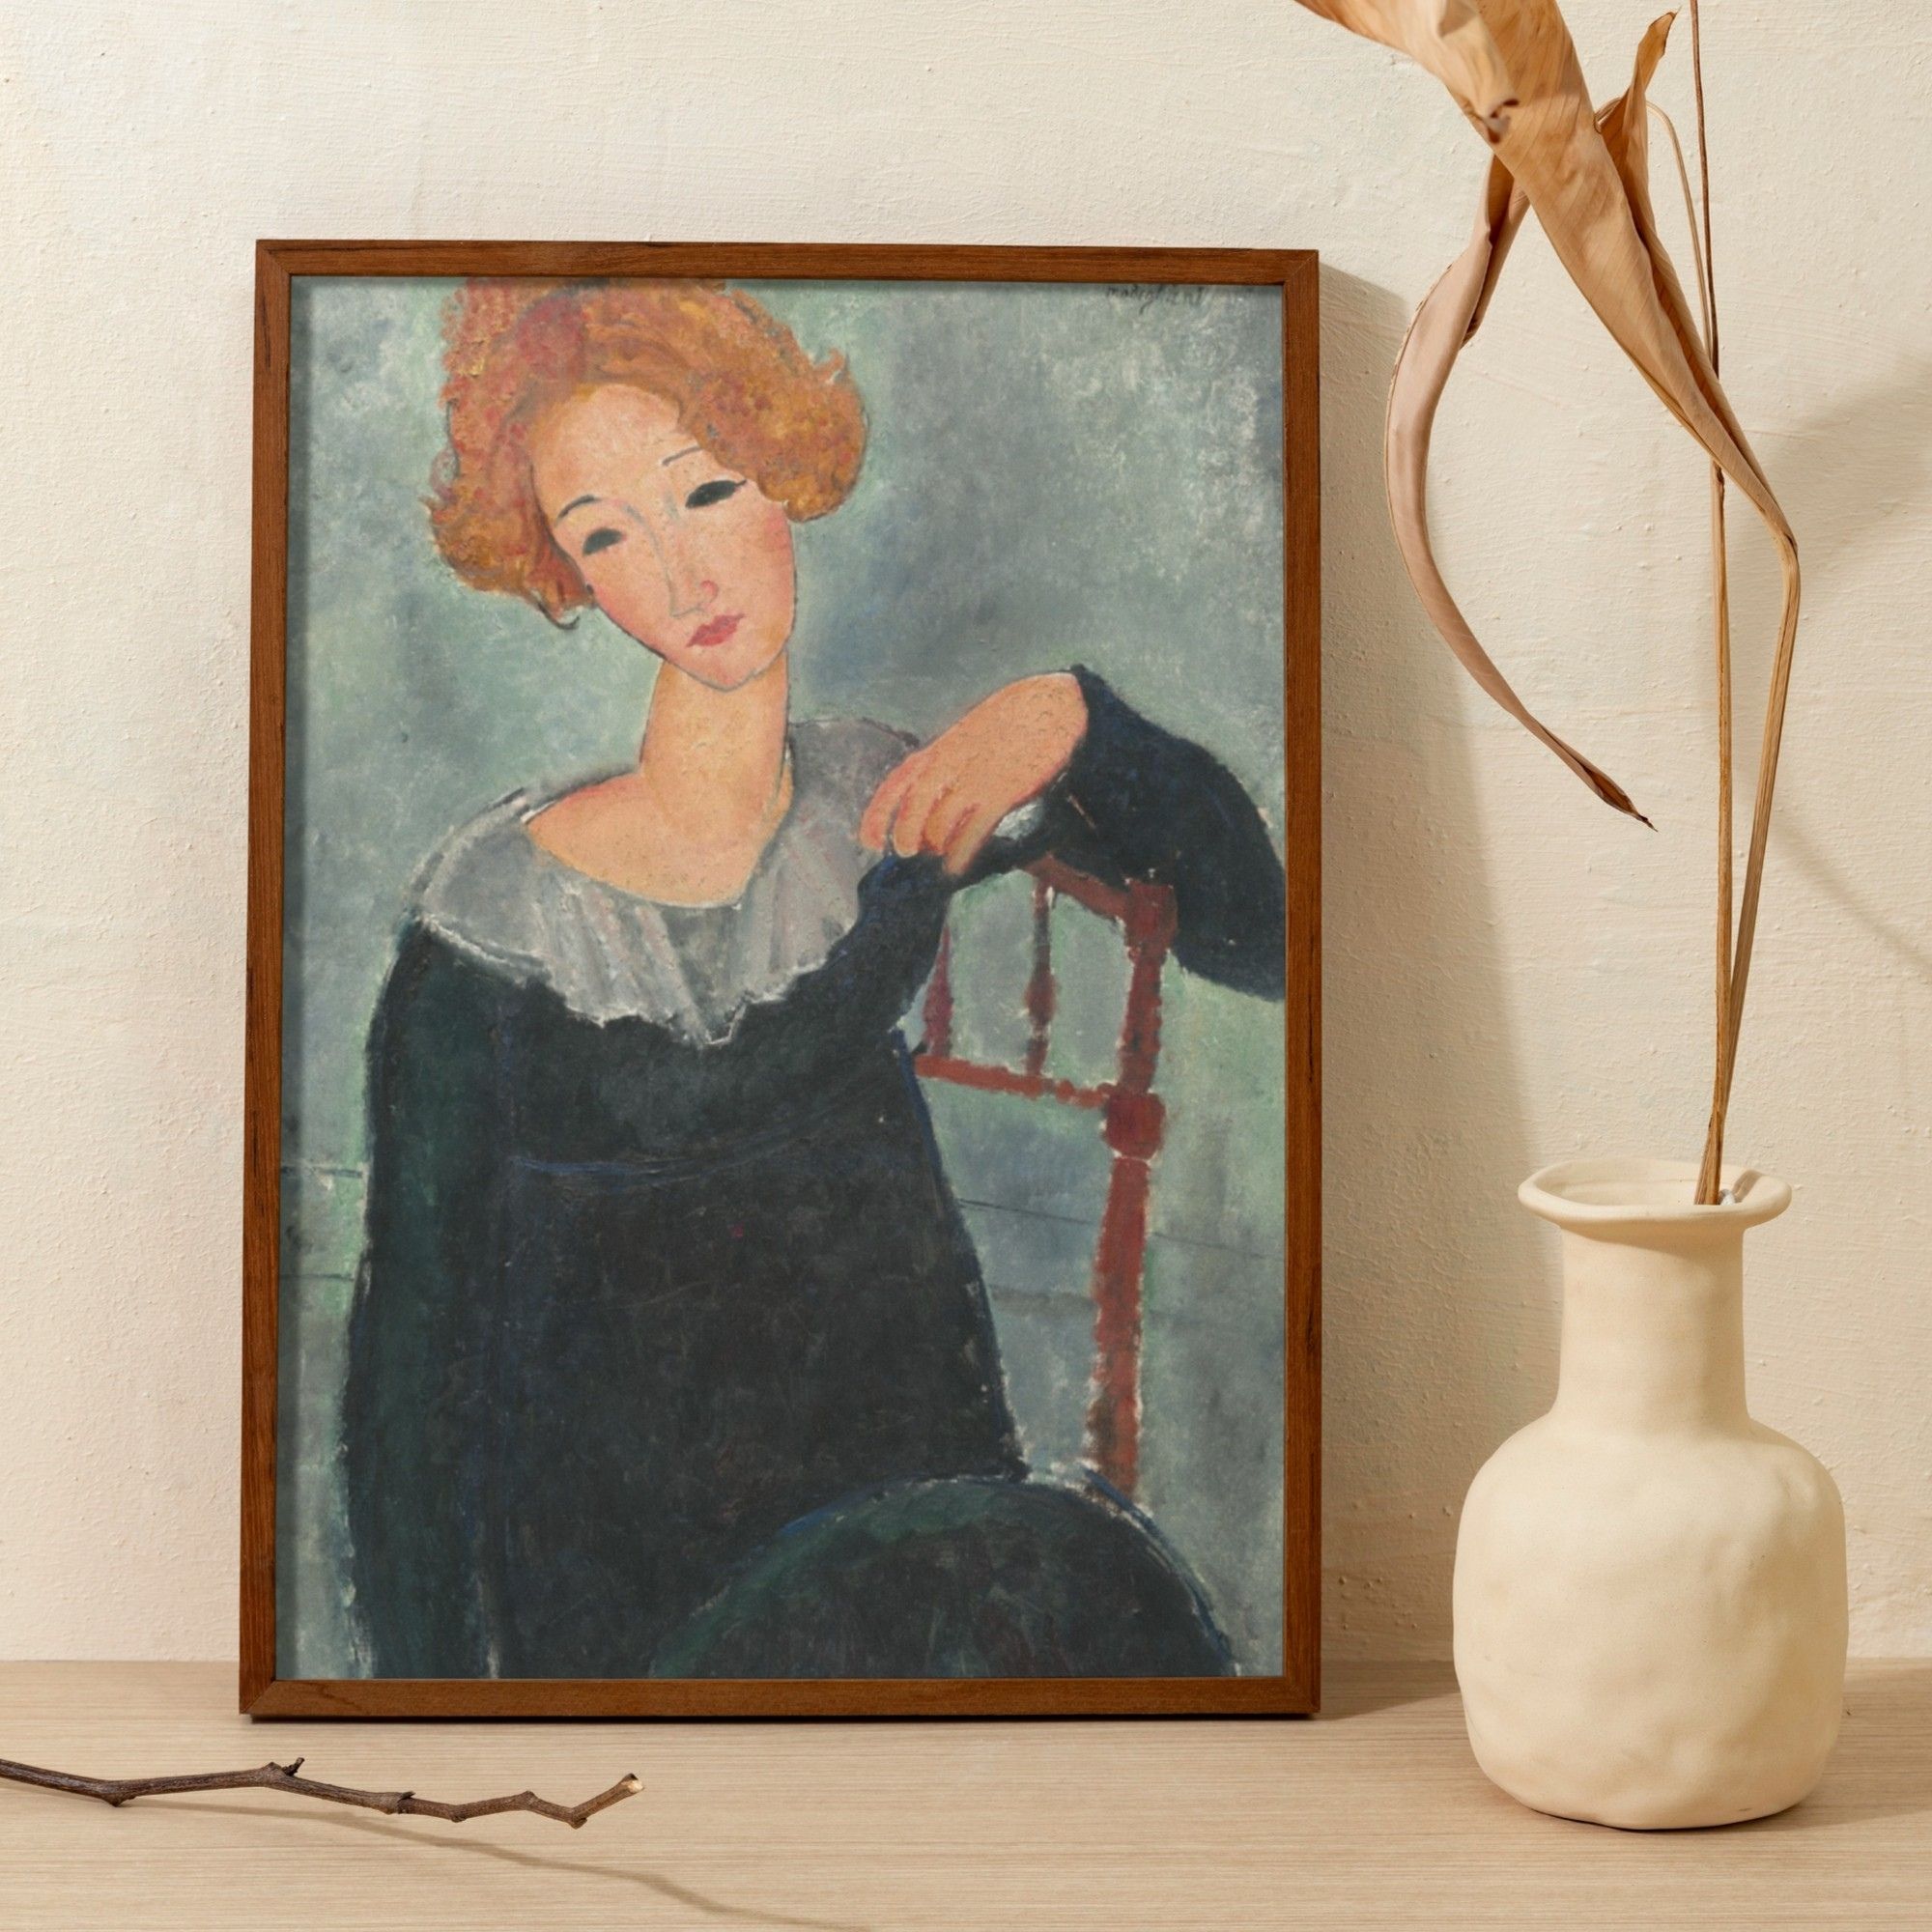 Portrait of a woman with red hair by Amedeo Modigliani, showcasing the artist's signature style of elongated features and serene expression. The subject's auburn hair complements her pensive gaze, as she rests her chin on her hand. This early 20th-century masterpiece combines elements of modernism with a touch of classical grace.